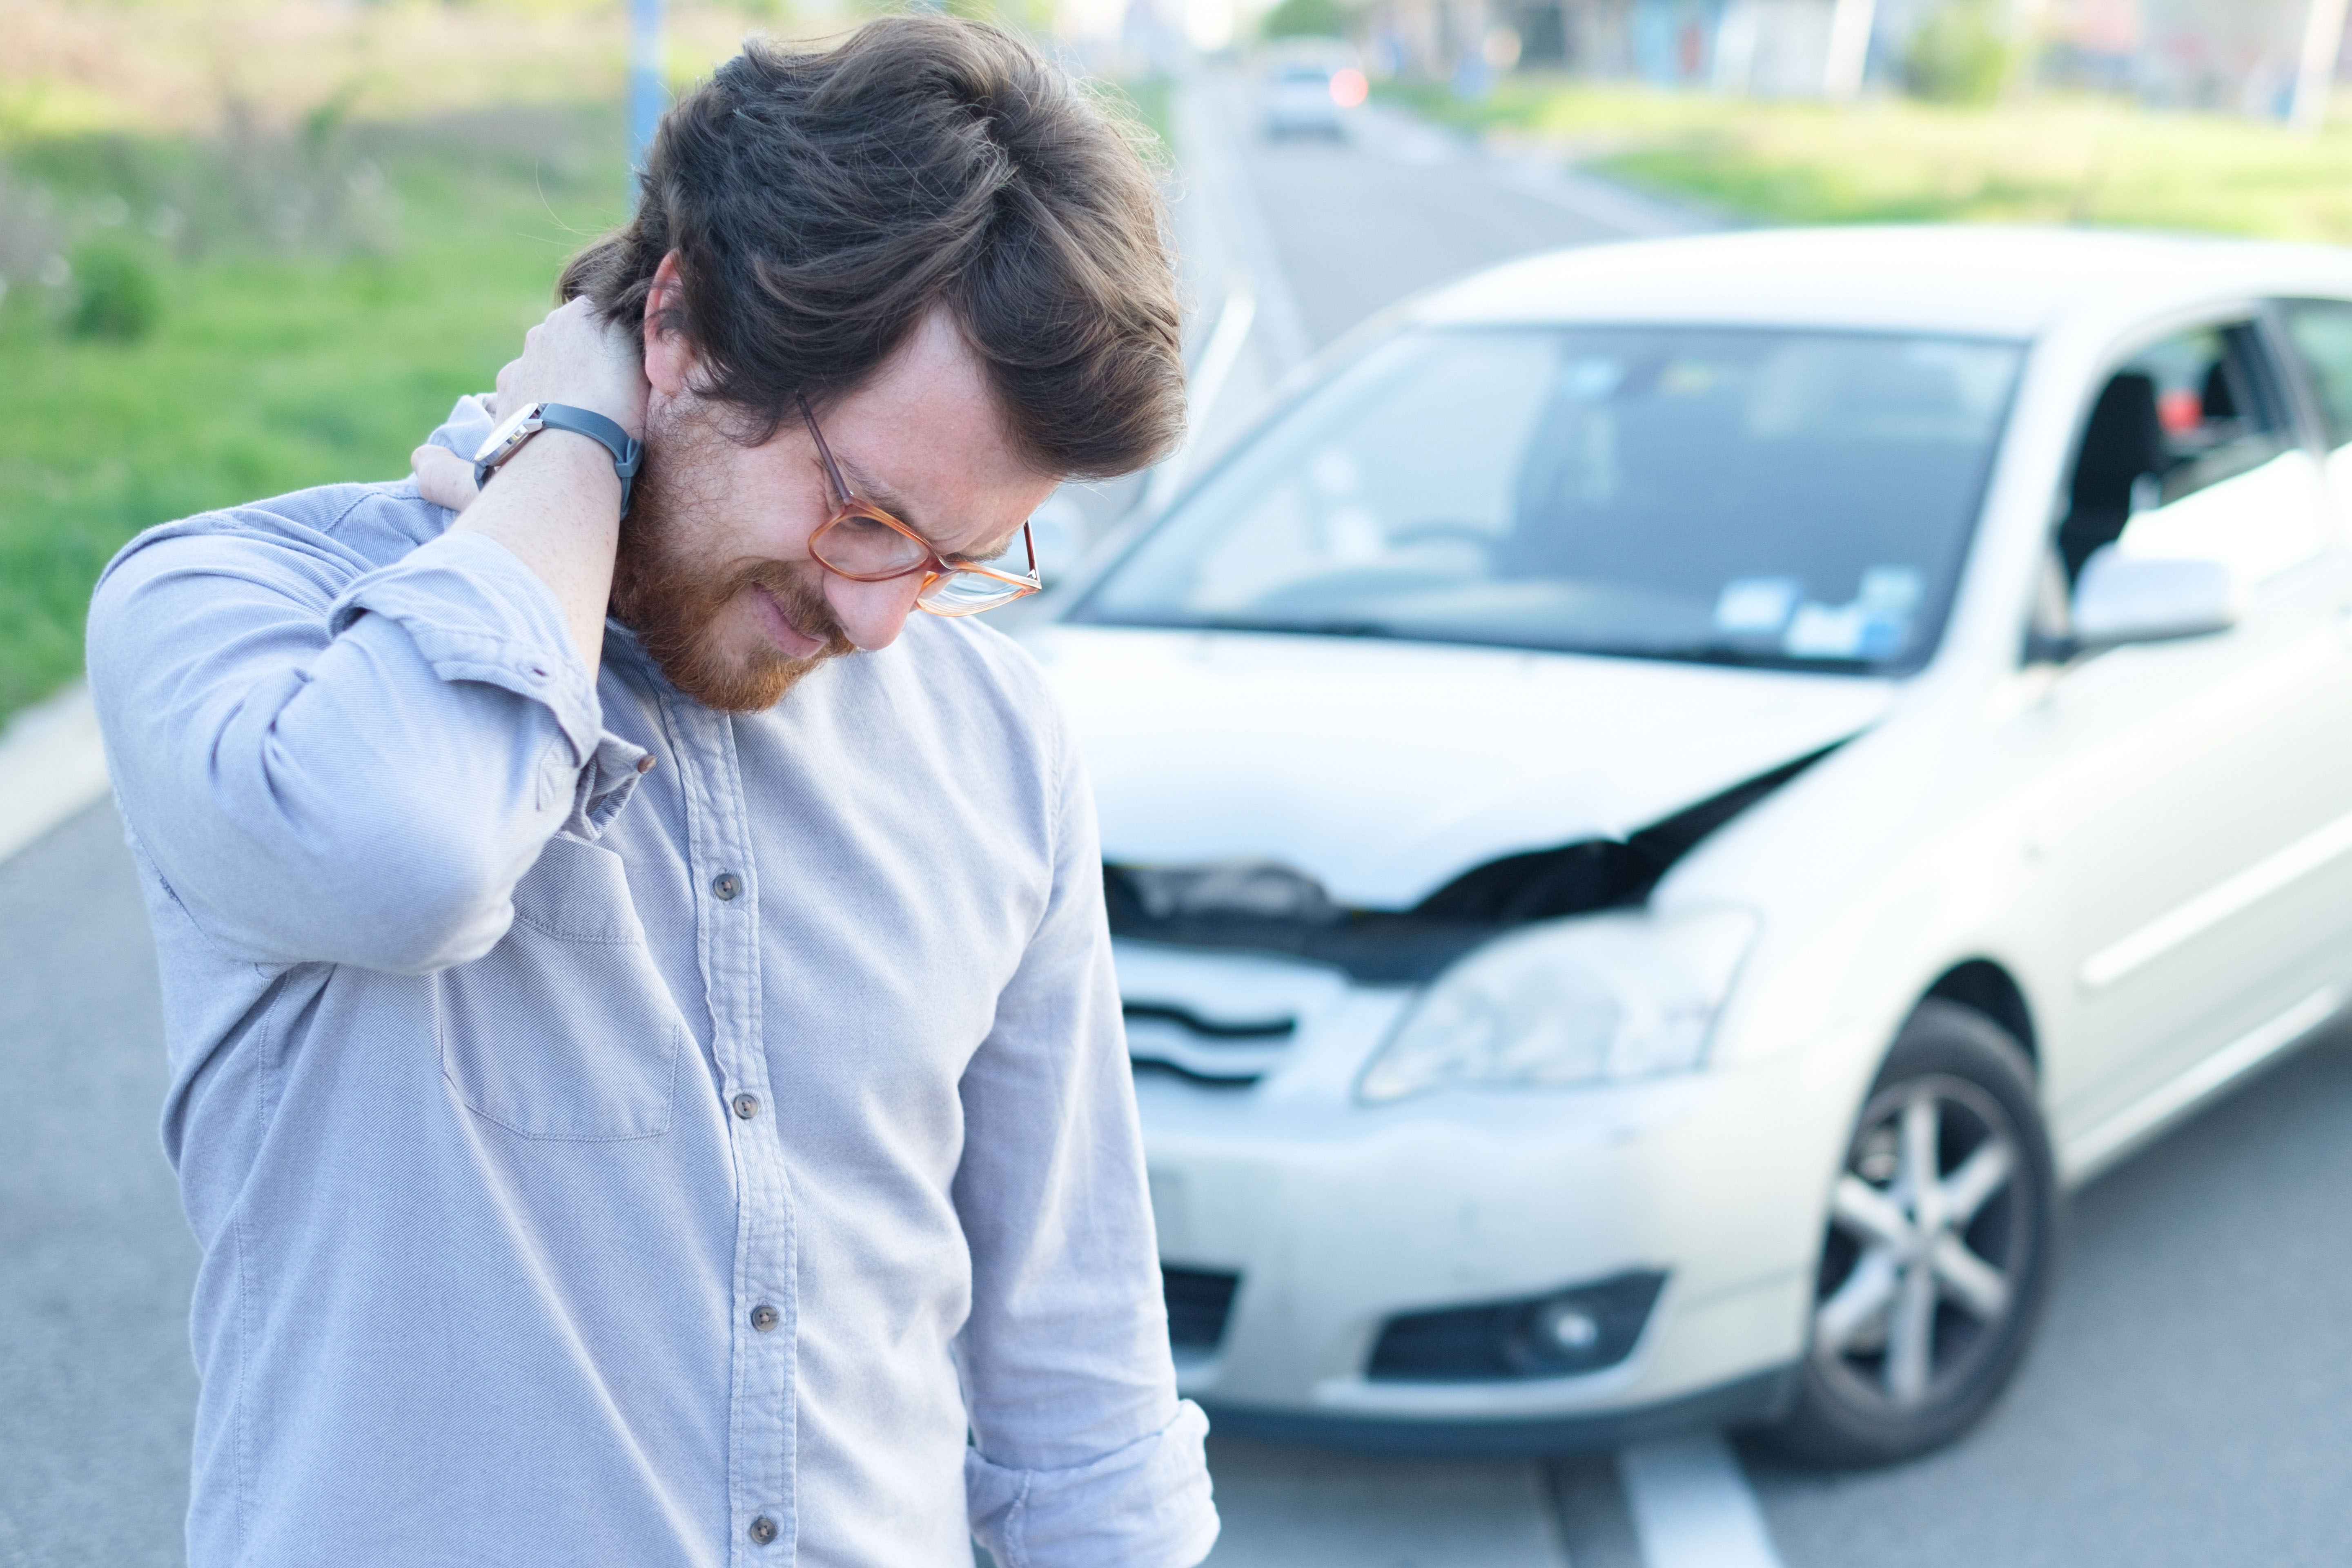 West Knoxville Auto Accident Injury Chiropractor